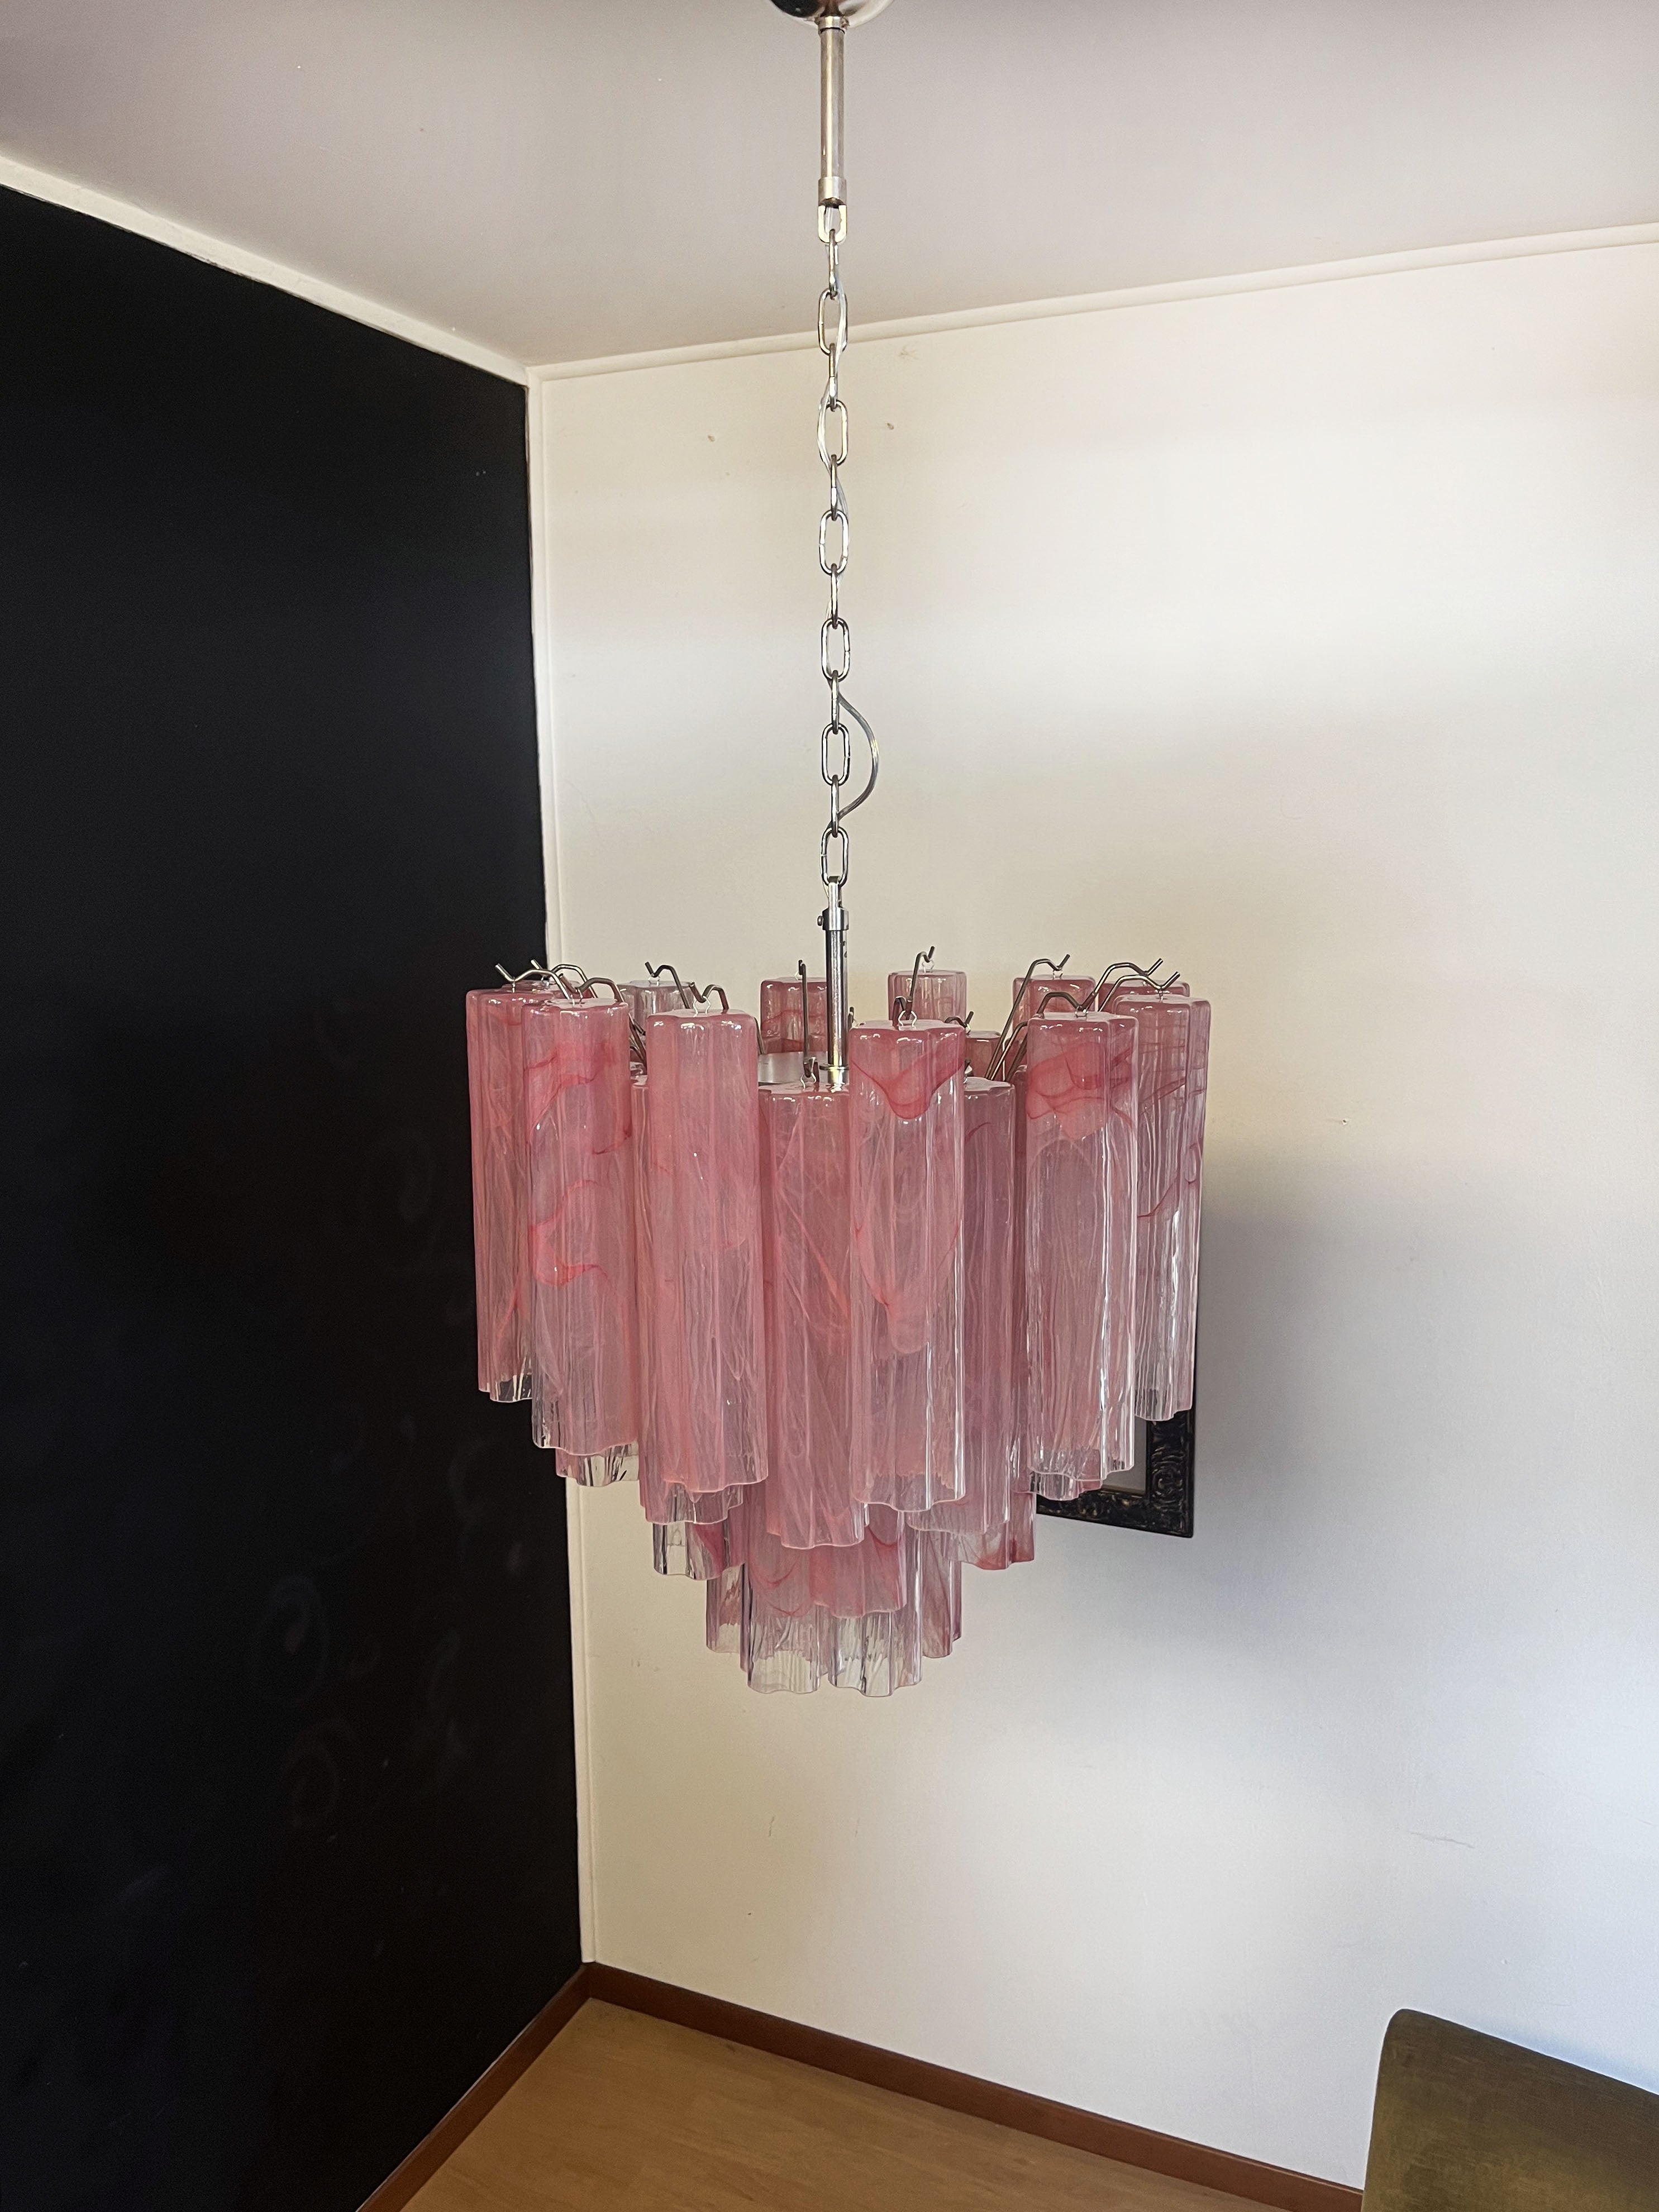 Italian vintage glass chandelier with alabaster pink glass tubes. The armor polished nickel supports 36 large glass tubes in a star shape. The alabaster technique created in Venetian glassworks gives the glass an elegant grain.
Period: late XX